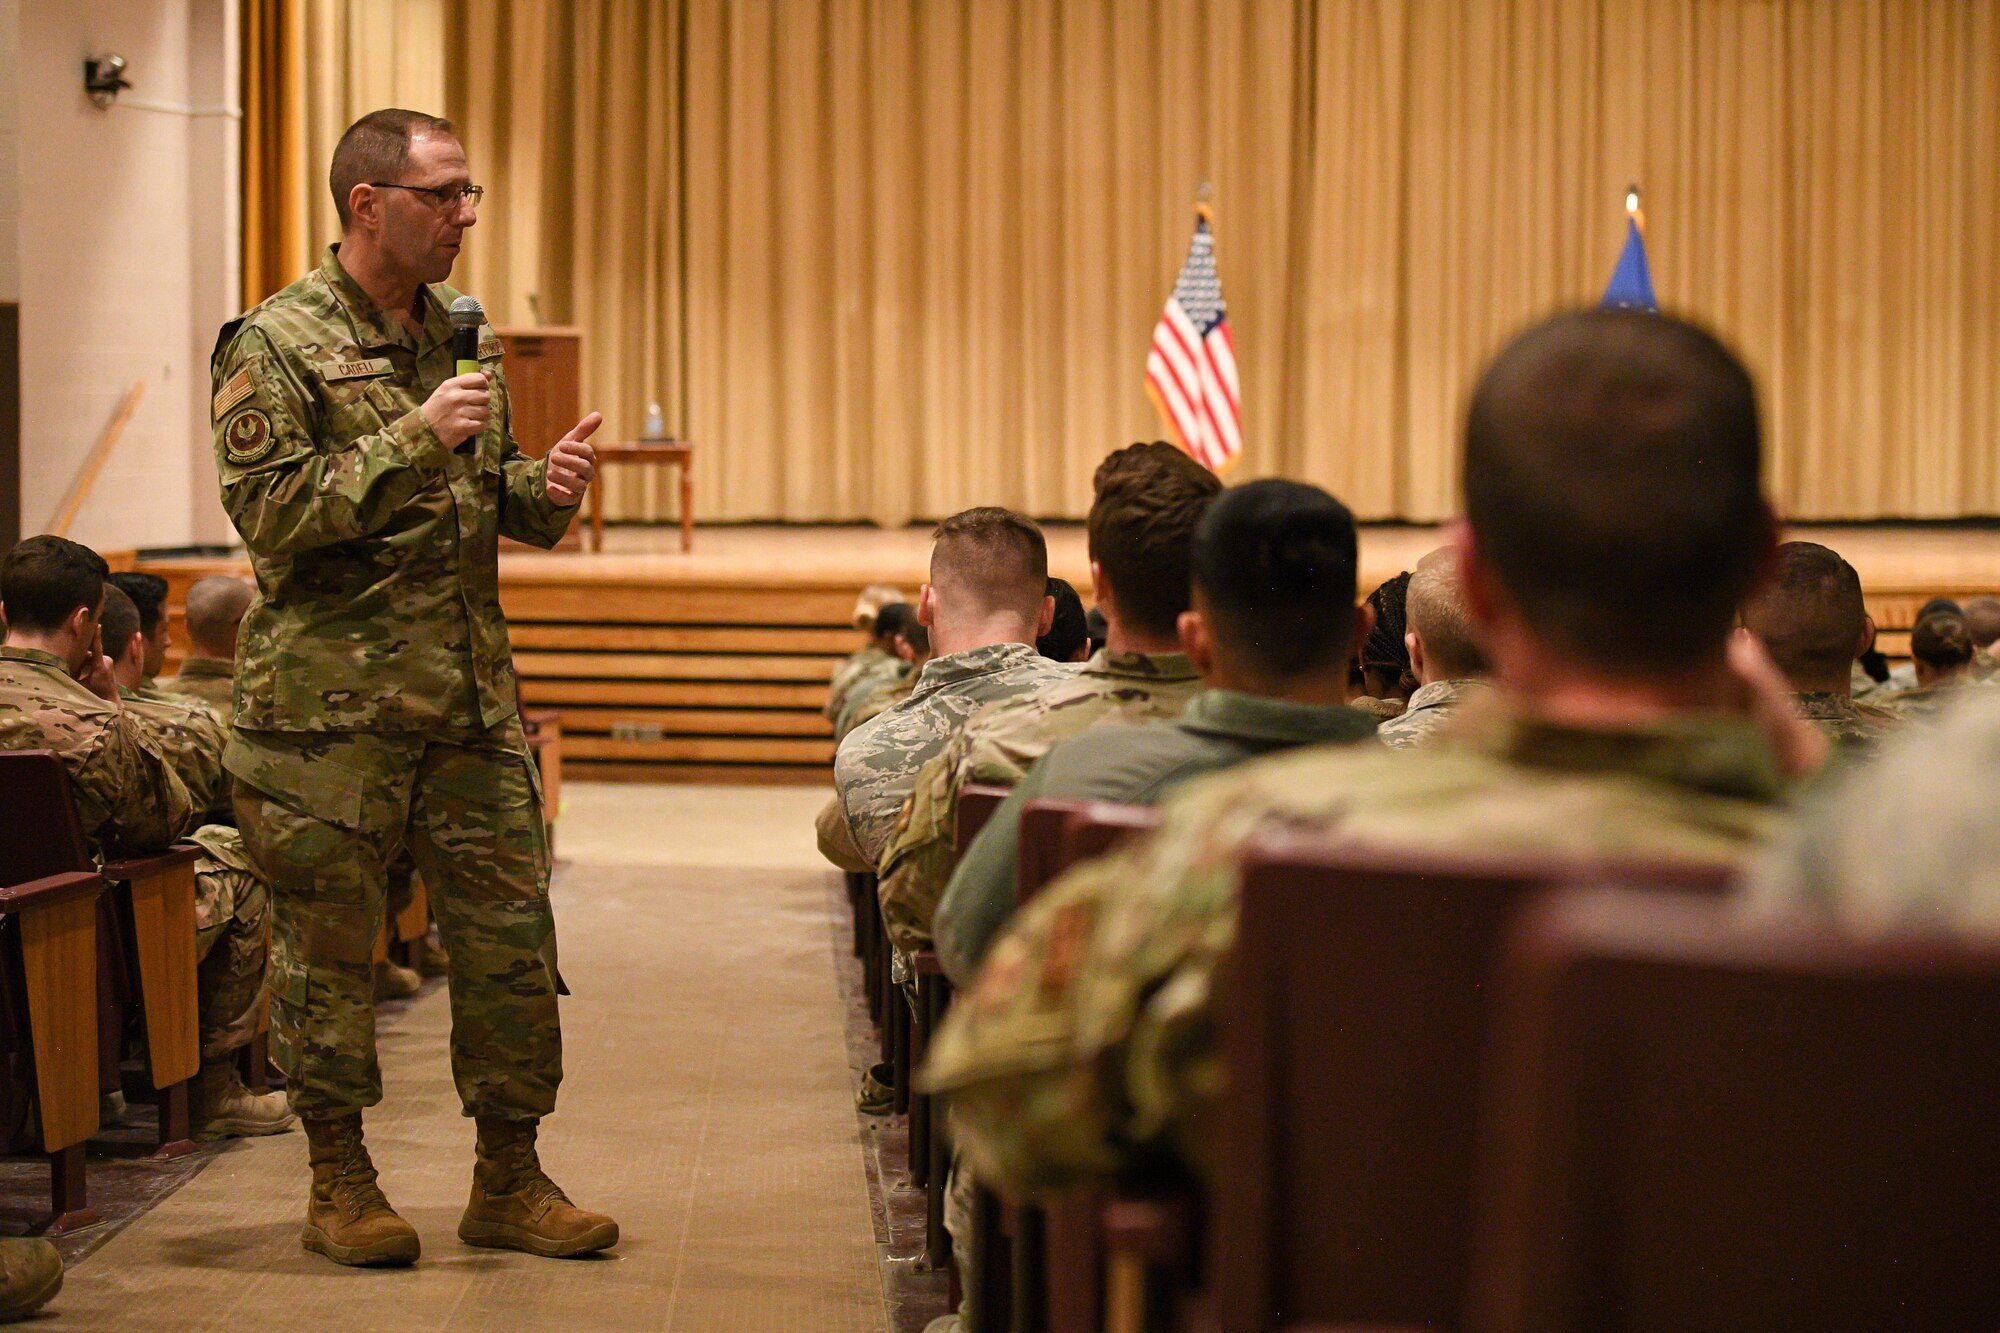 Chief Master Sgt. Stanley C. Cadell, Air Force Materiel command chief, speaks with Airmen during a town hall meeting at Hill Air Force Base, Utah, March 2, 2020. Cadell visited Hill AFB March 1-3 to tour facilities and meet with the base’s Airmen. (U.S. Air Force photo by R. Nial Bradshaw)